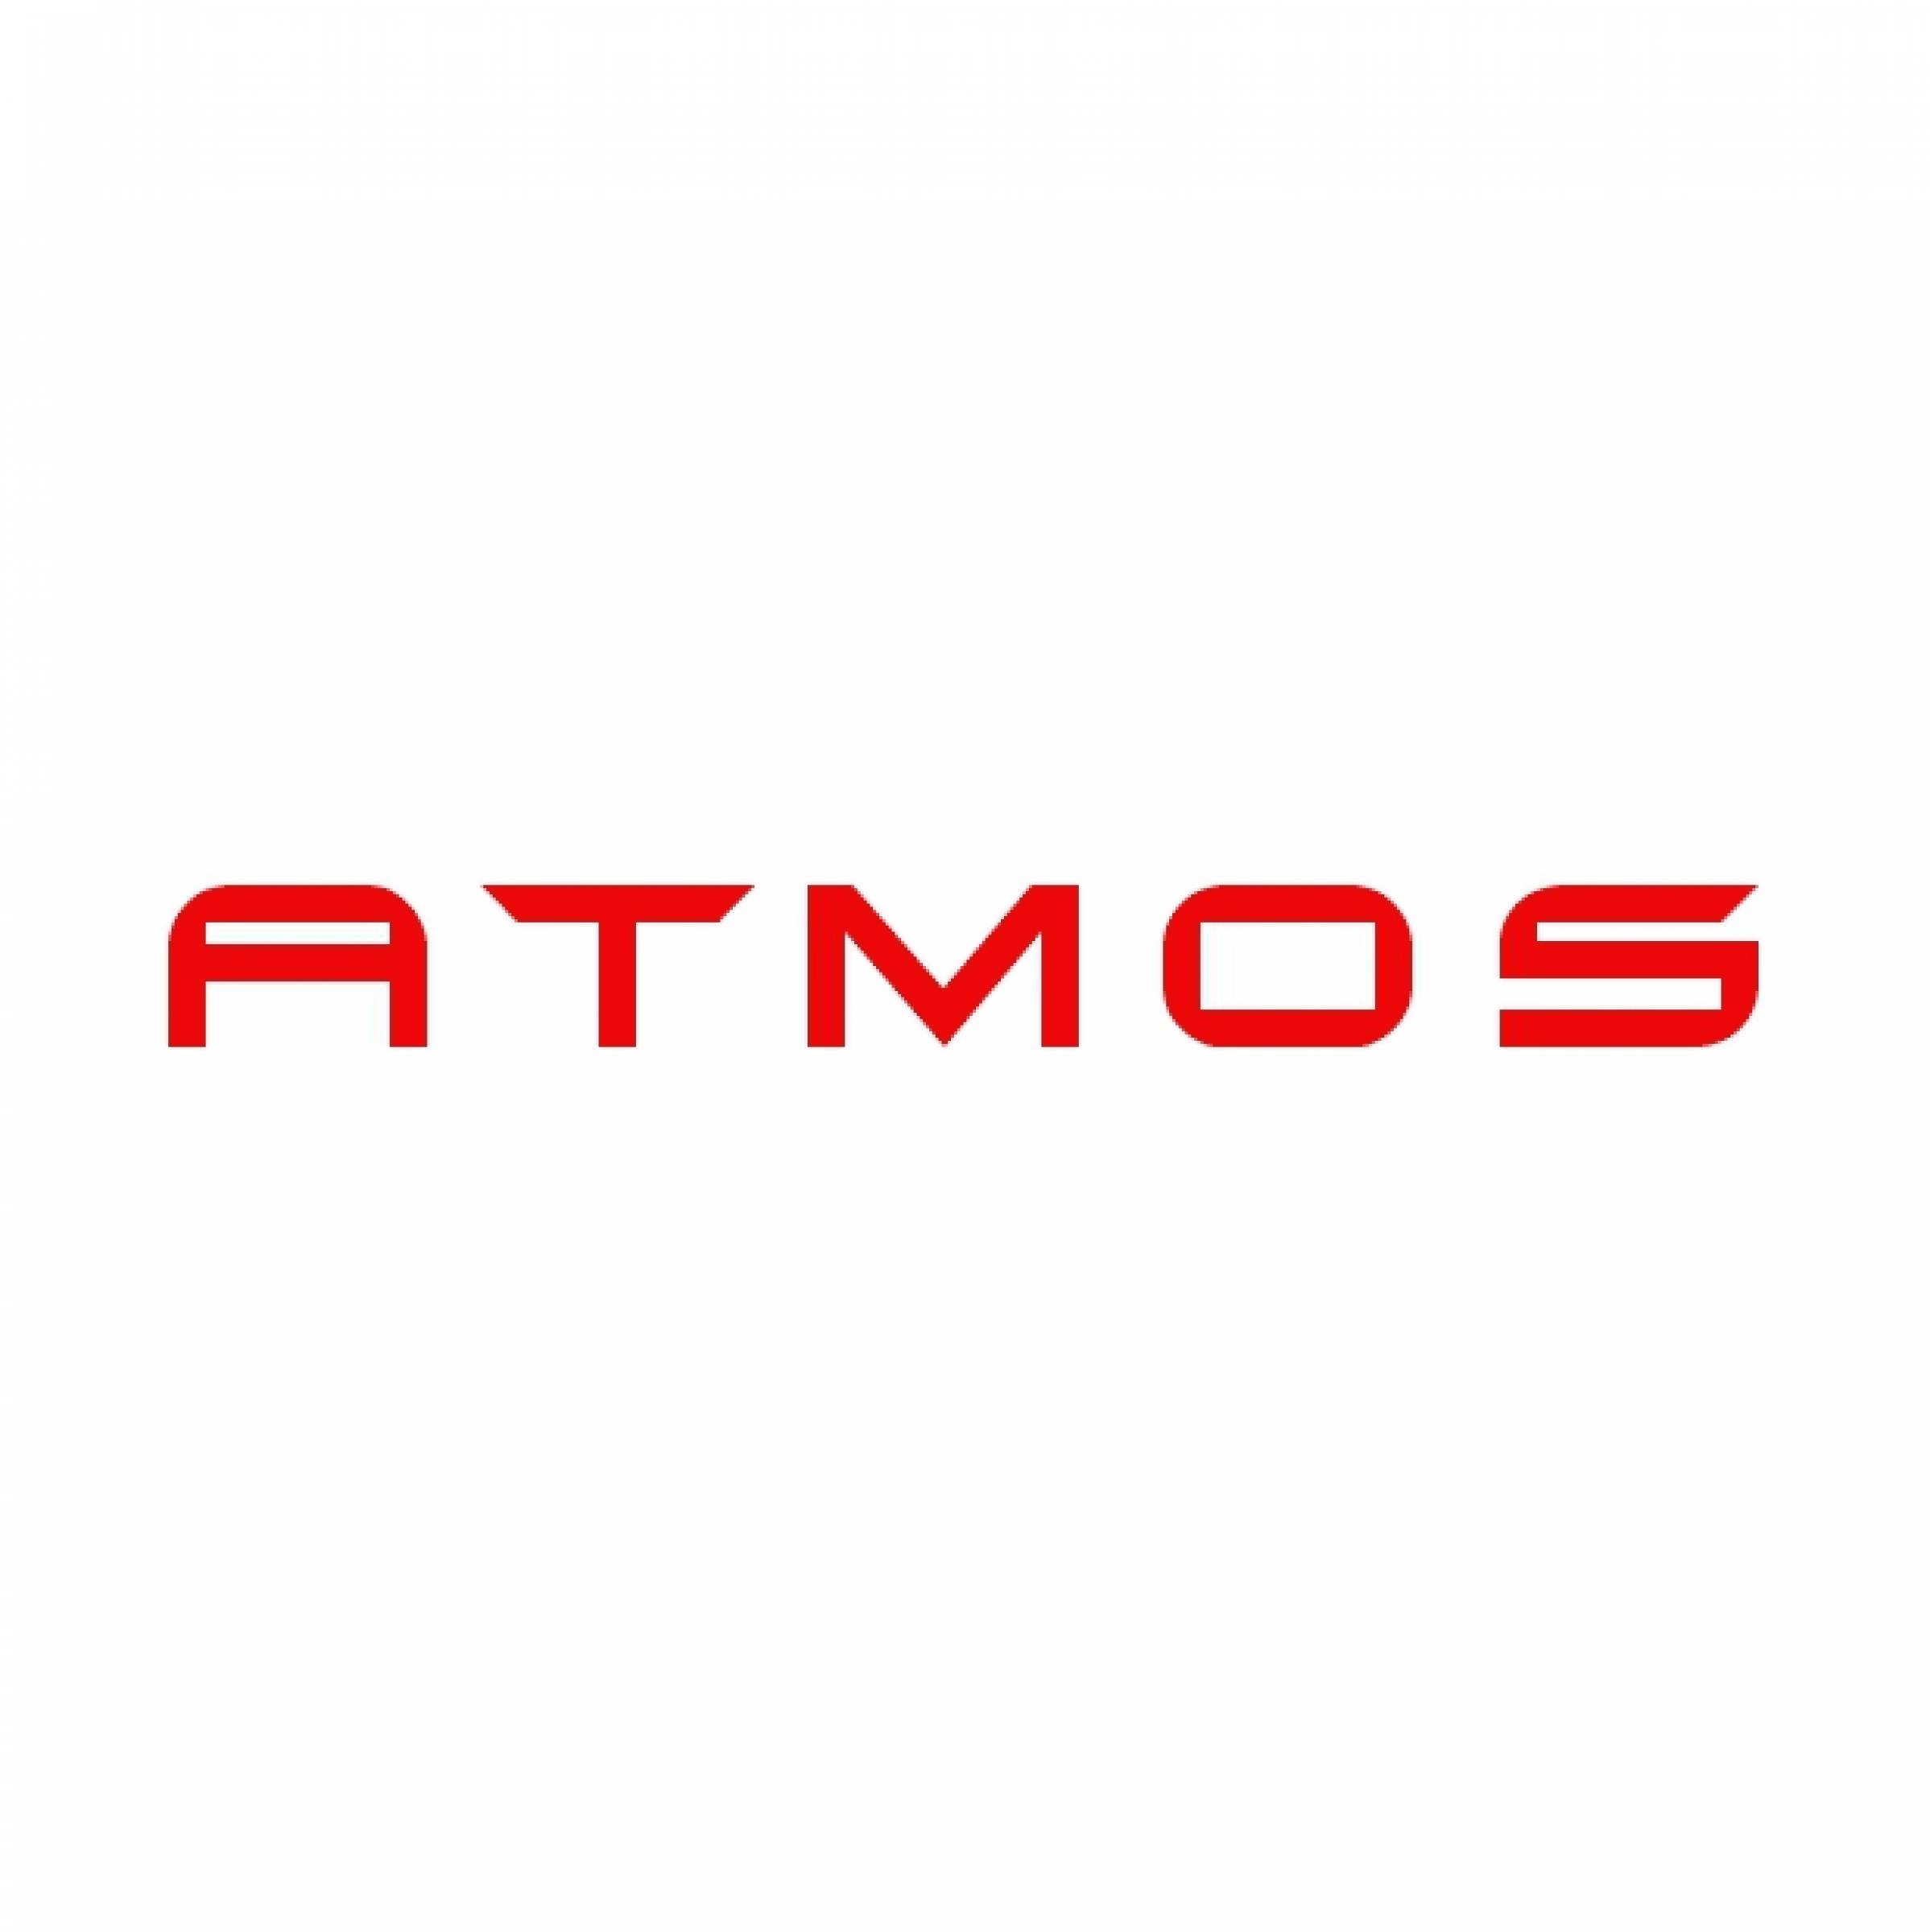 Atmos – Digital Marketing, Printing and Plastic Services